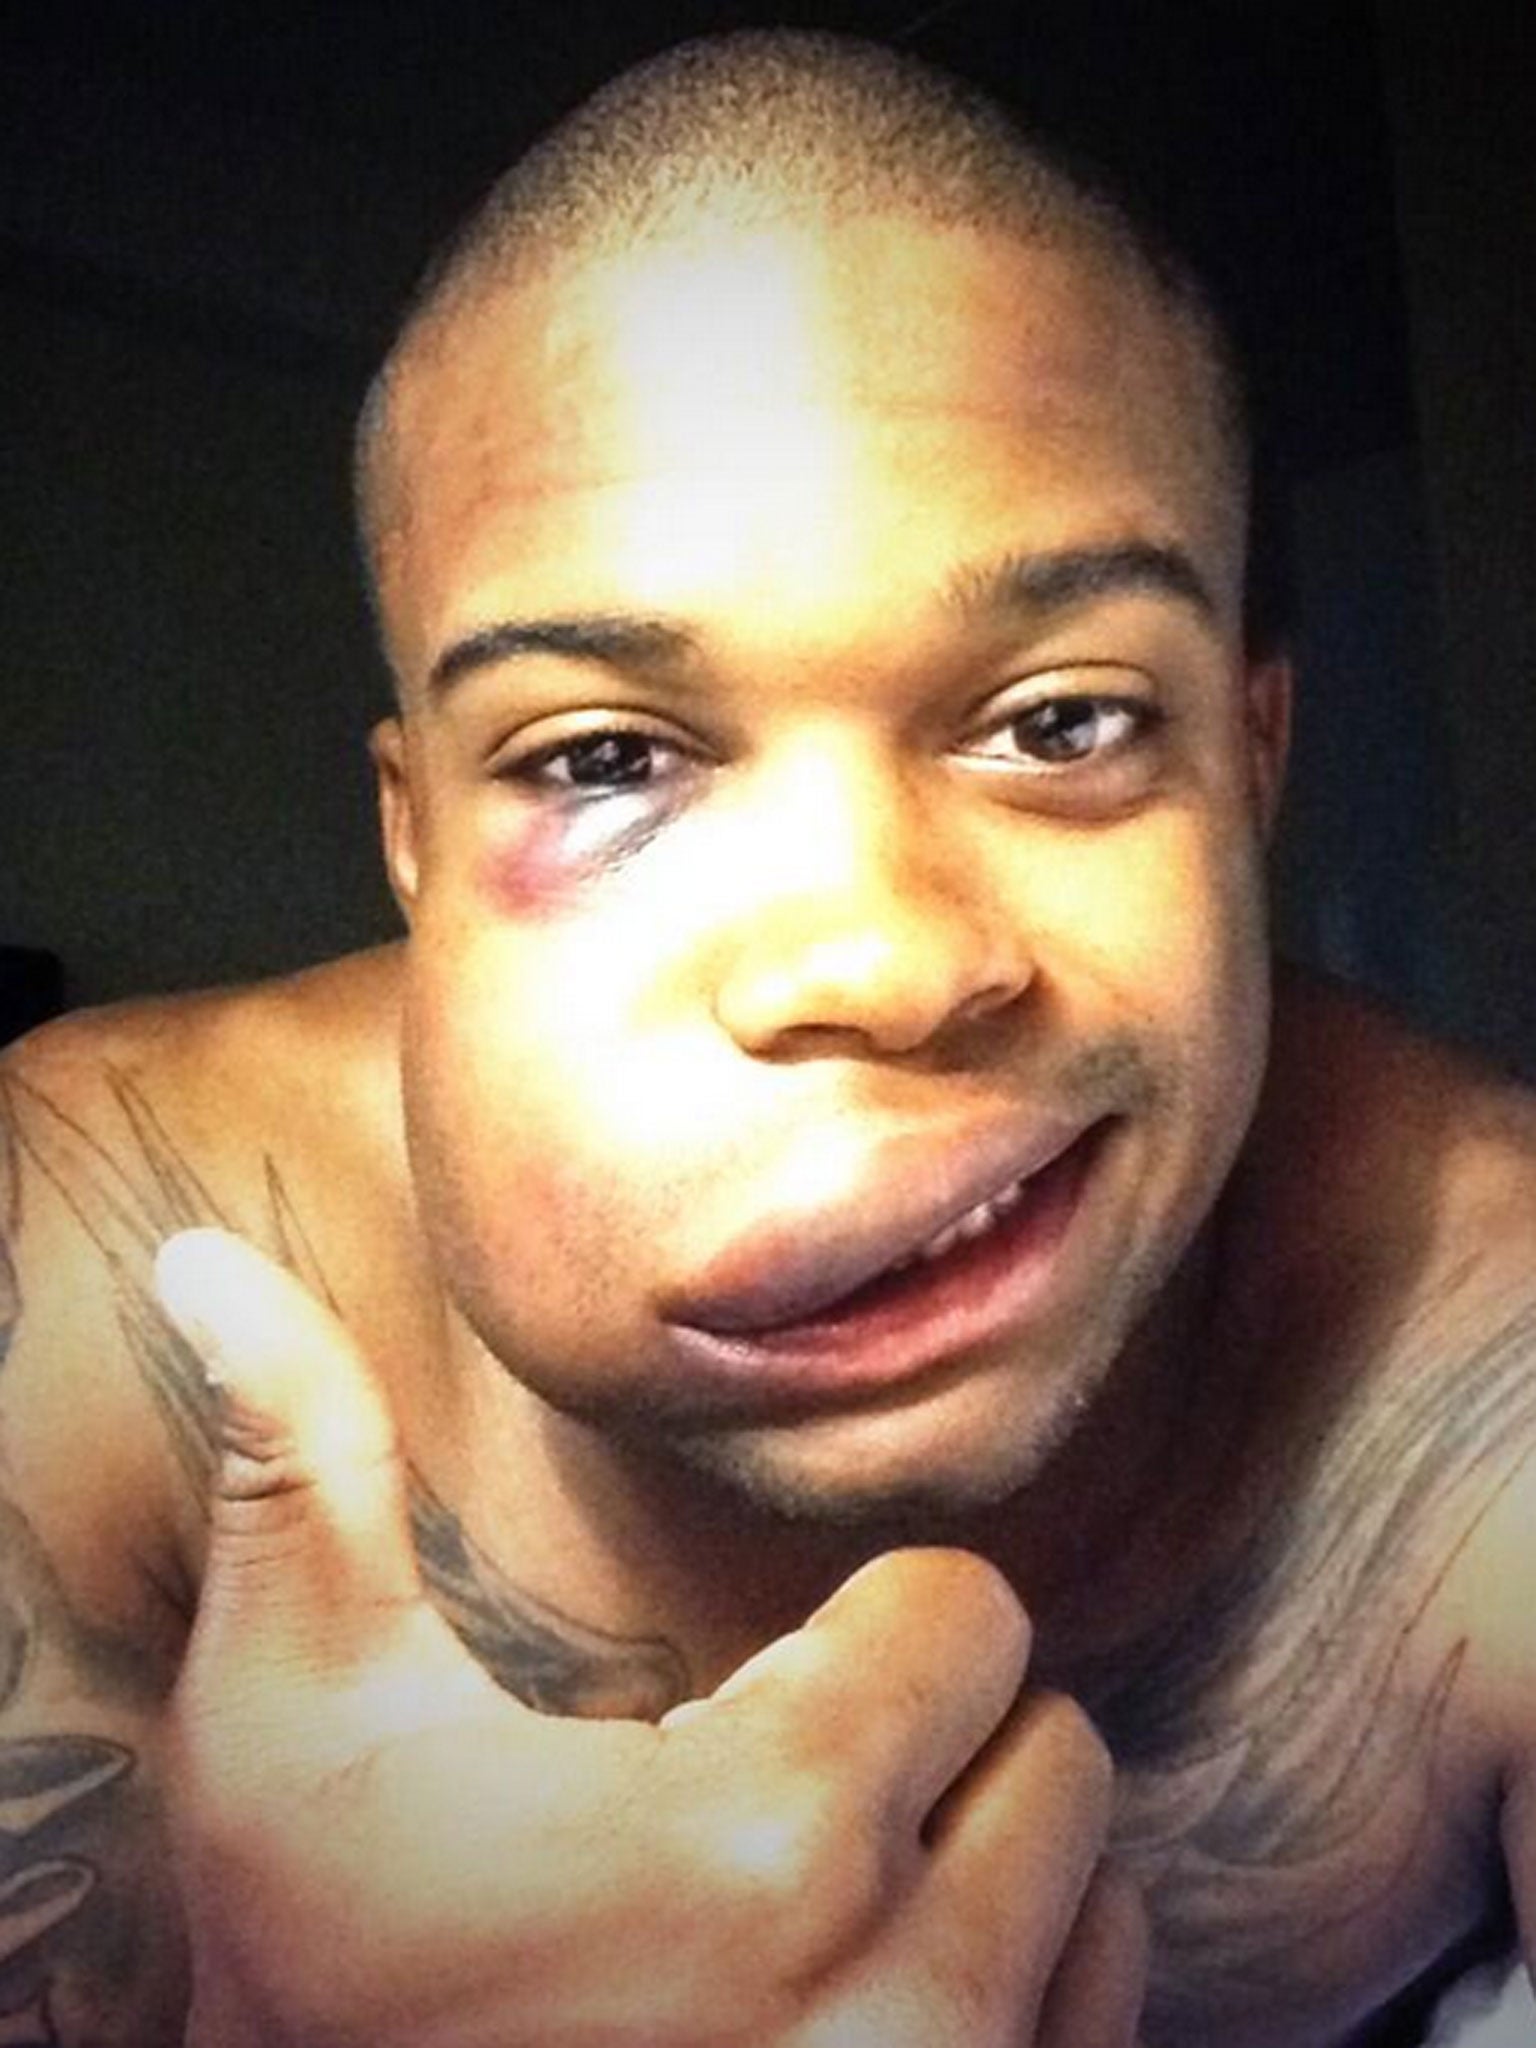 Major League Baseball hopeful Delino DeShields Jr takes 90 mph fastball to  the face, The Independent